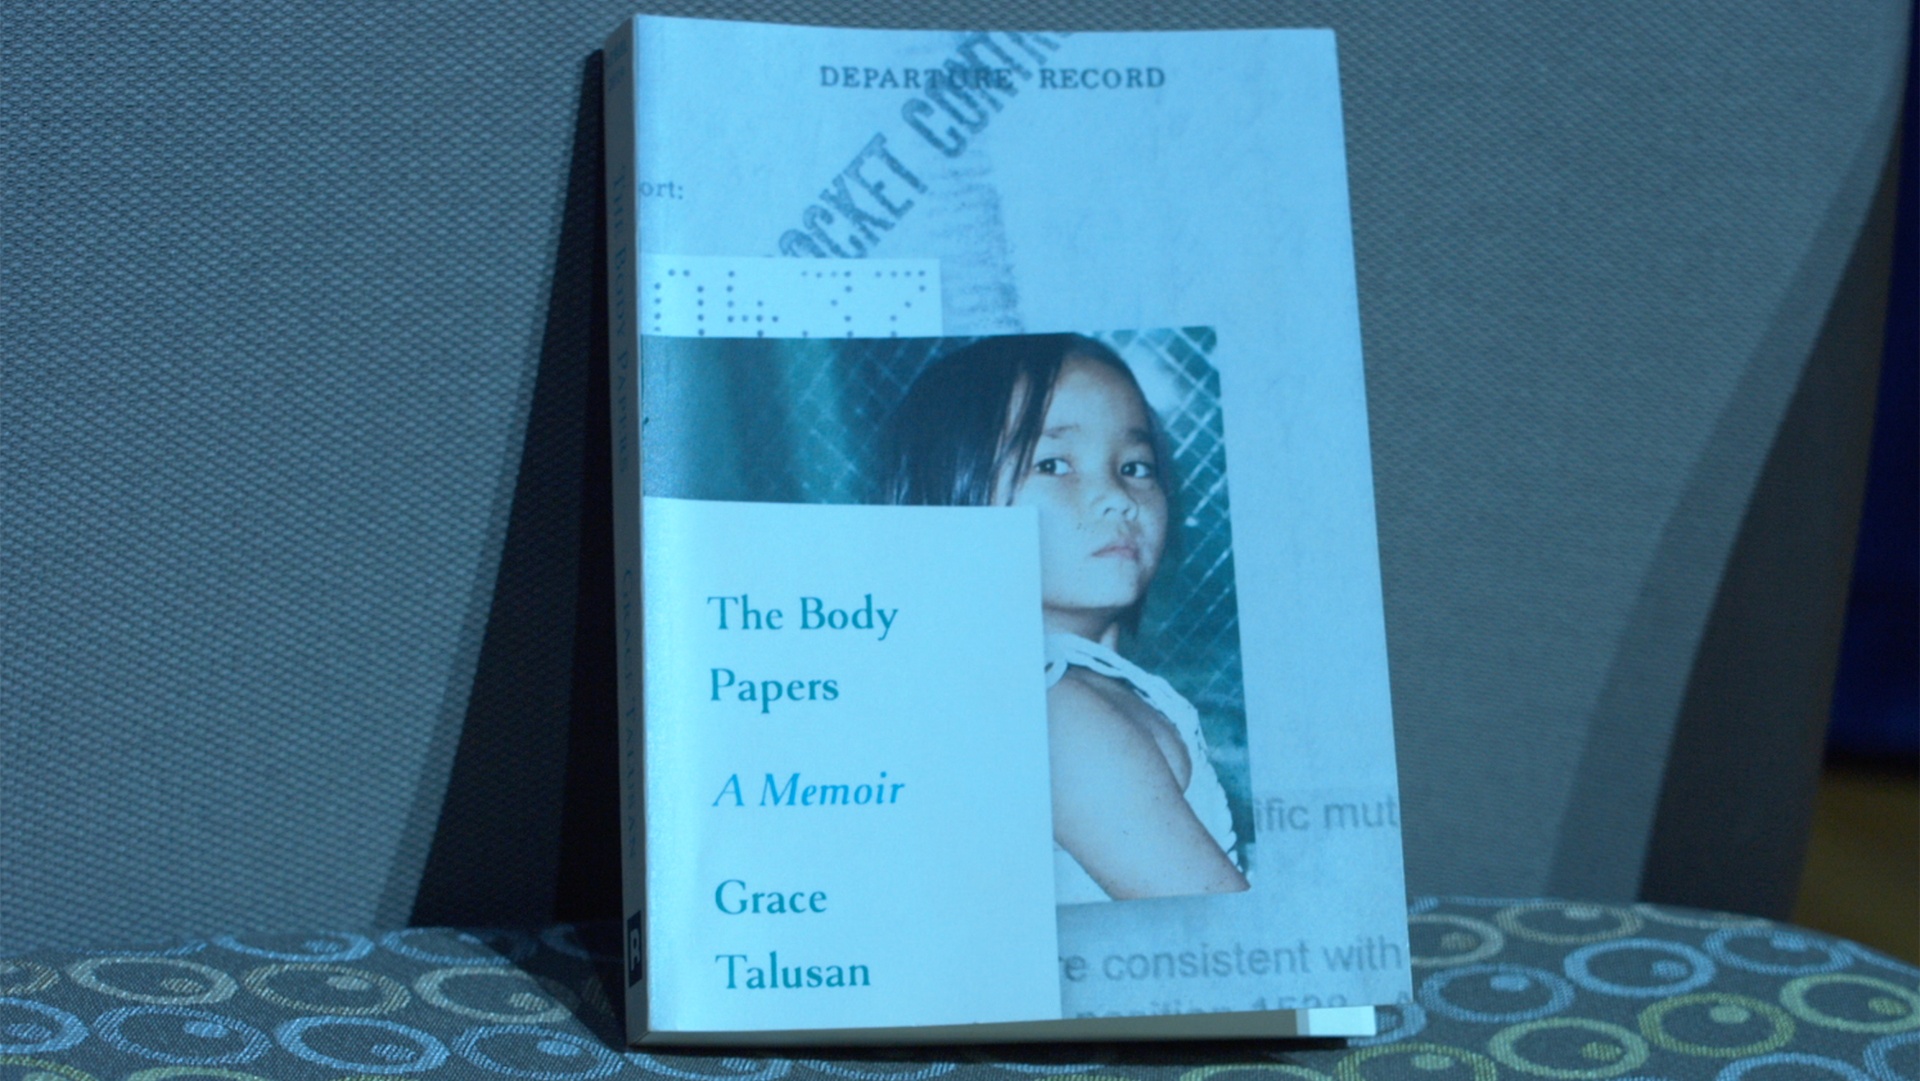 Grace Talusan's photo on the cover of her book, “The Body Papers.”